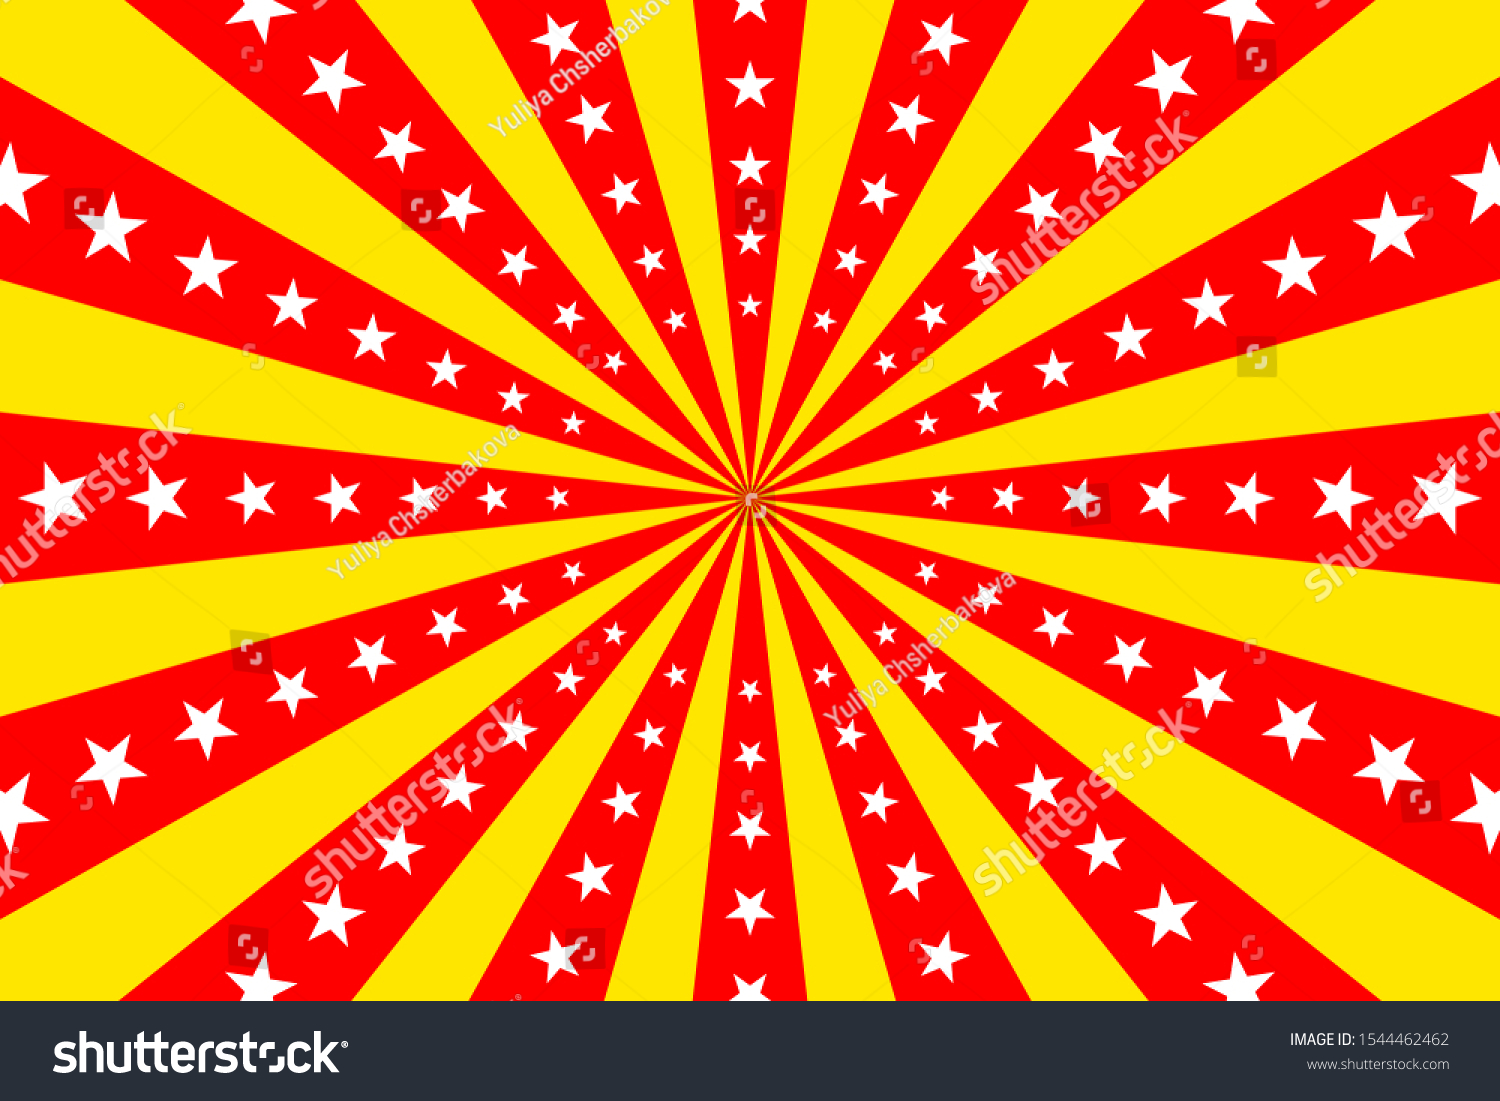 Circus Vintage Background Vector Red Circus Stock Vector Royalty